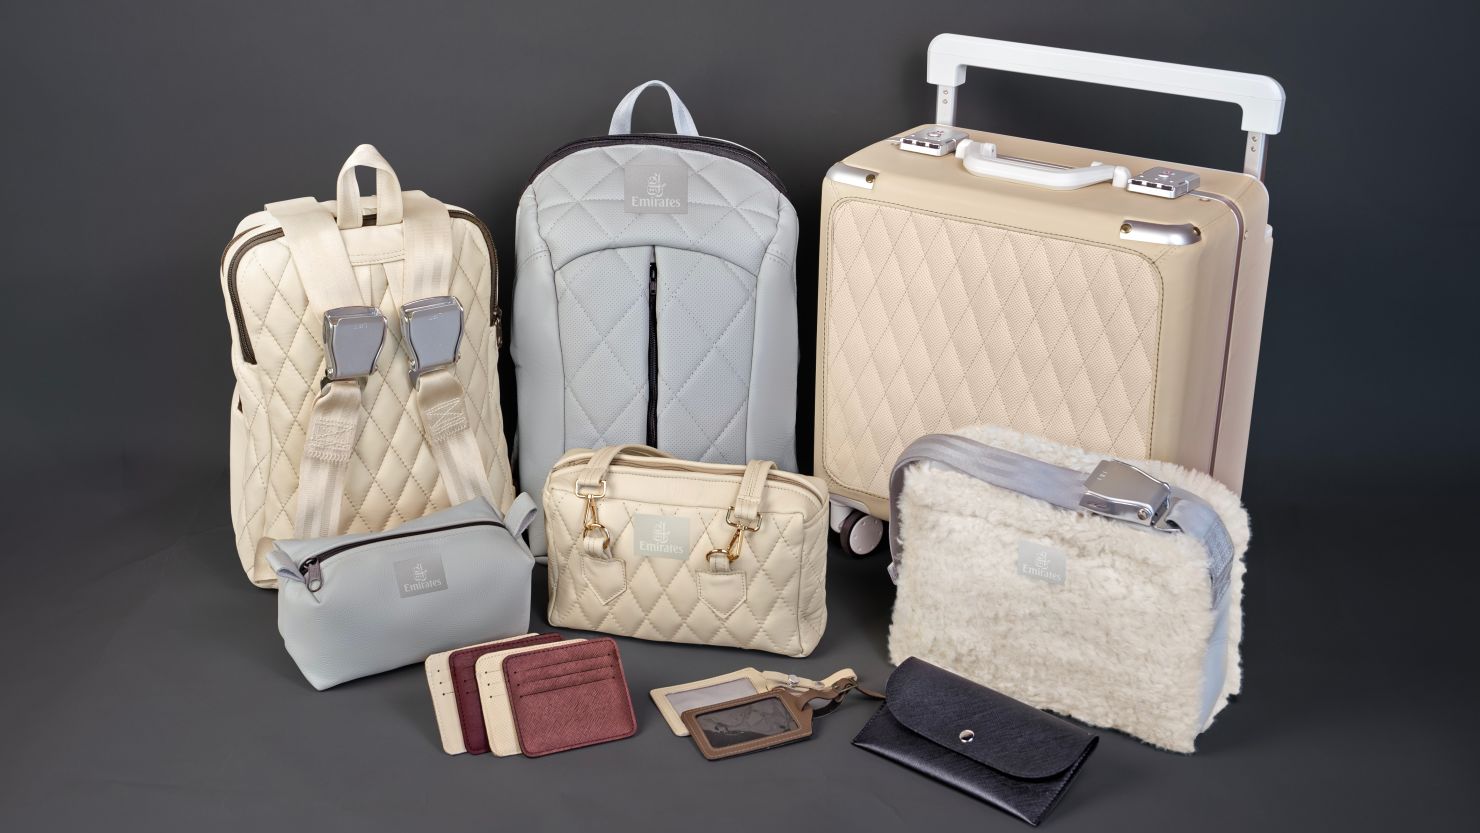 Emirates is launching a collection of luggage and accessories made from plane parts.